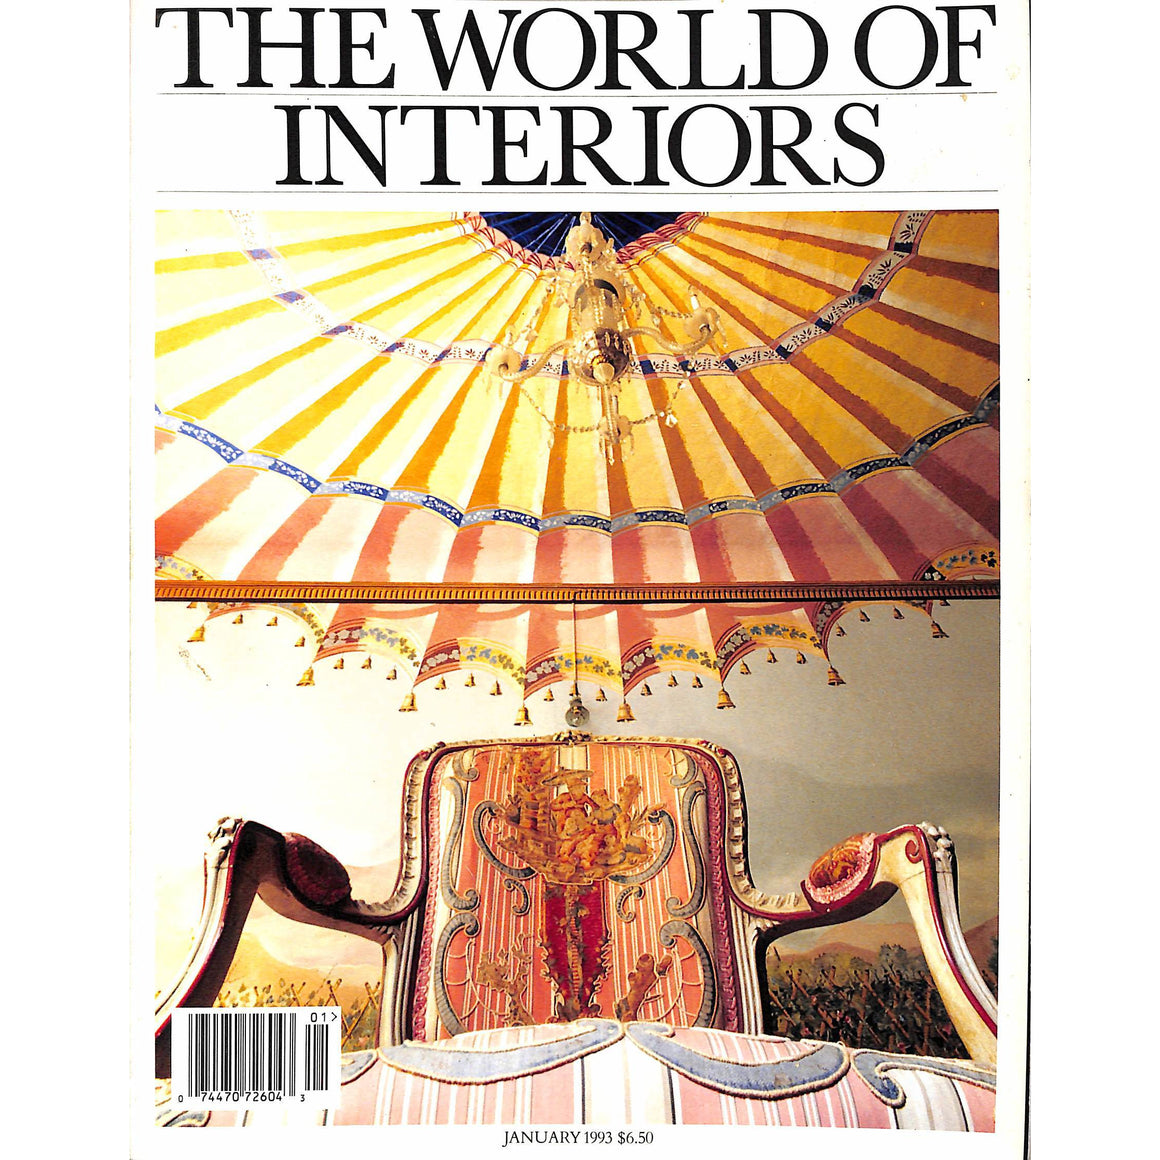 The World of Interiors January 1993 (SOLD)